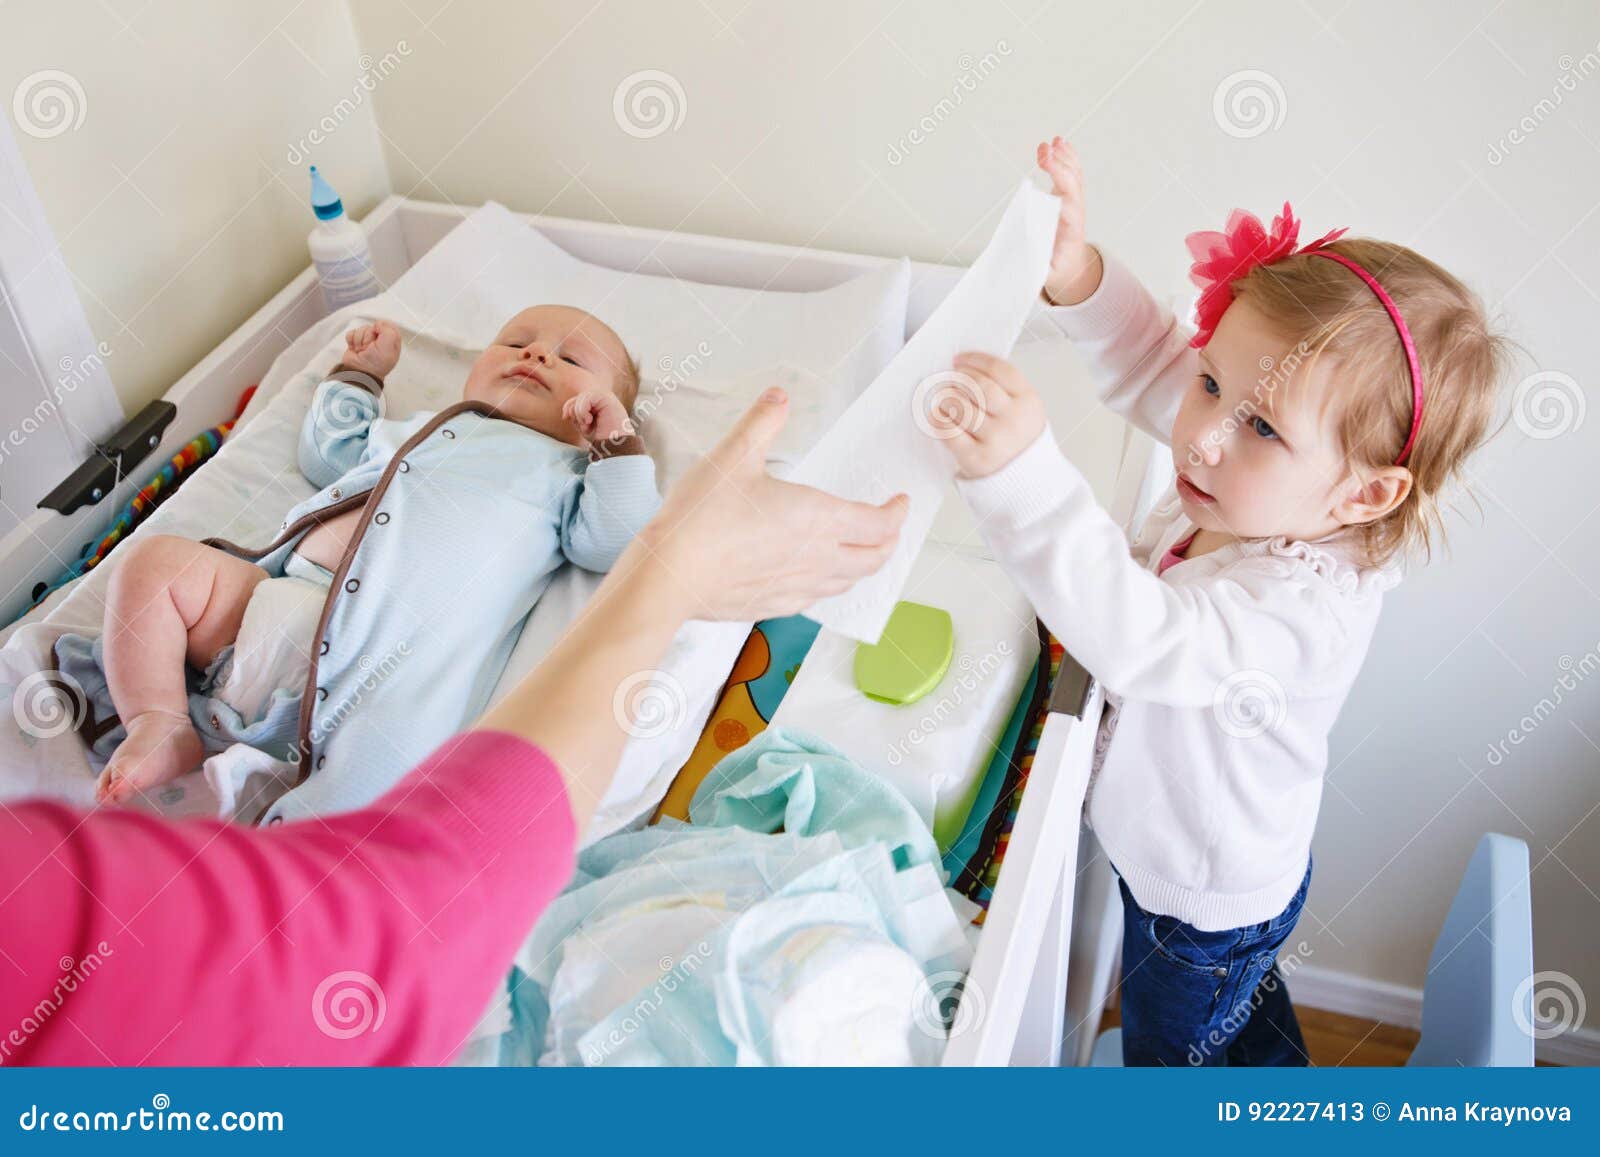 Cute Girl Toddler Helping Her Mother, Changing Baby Diaper Stock Image